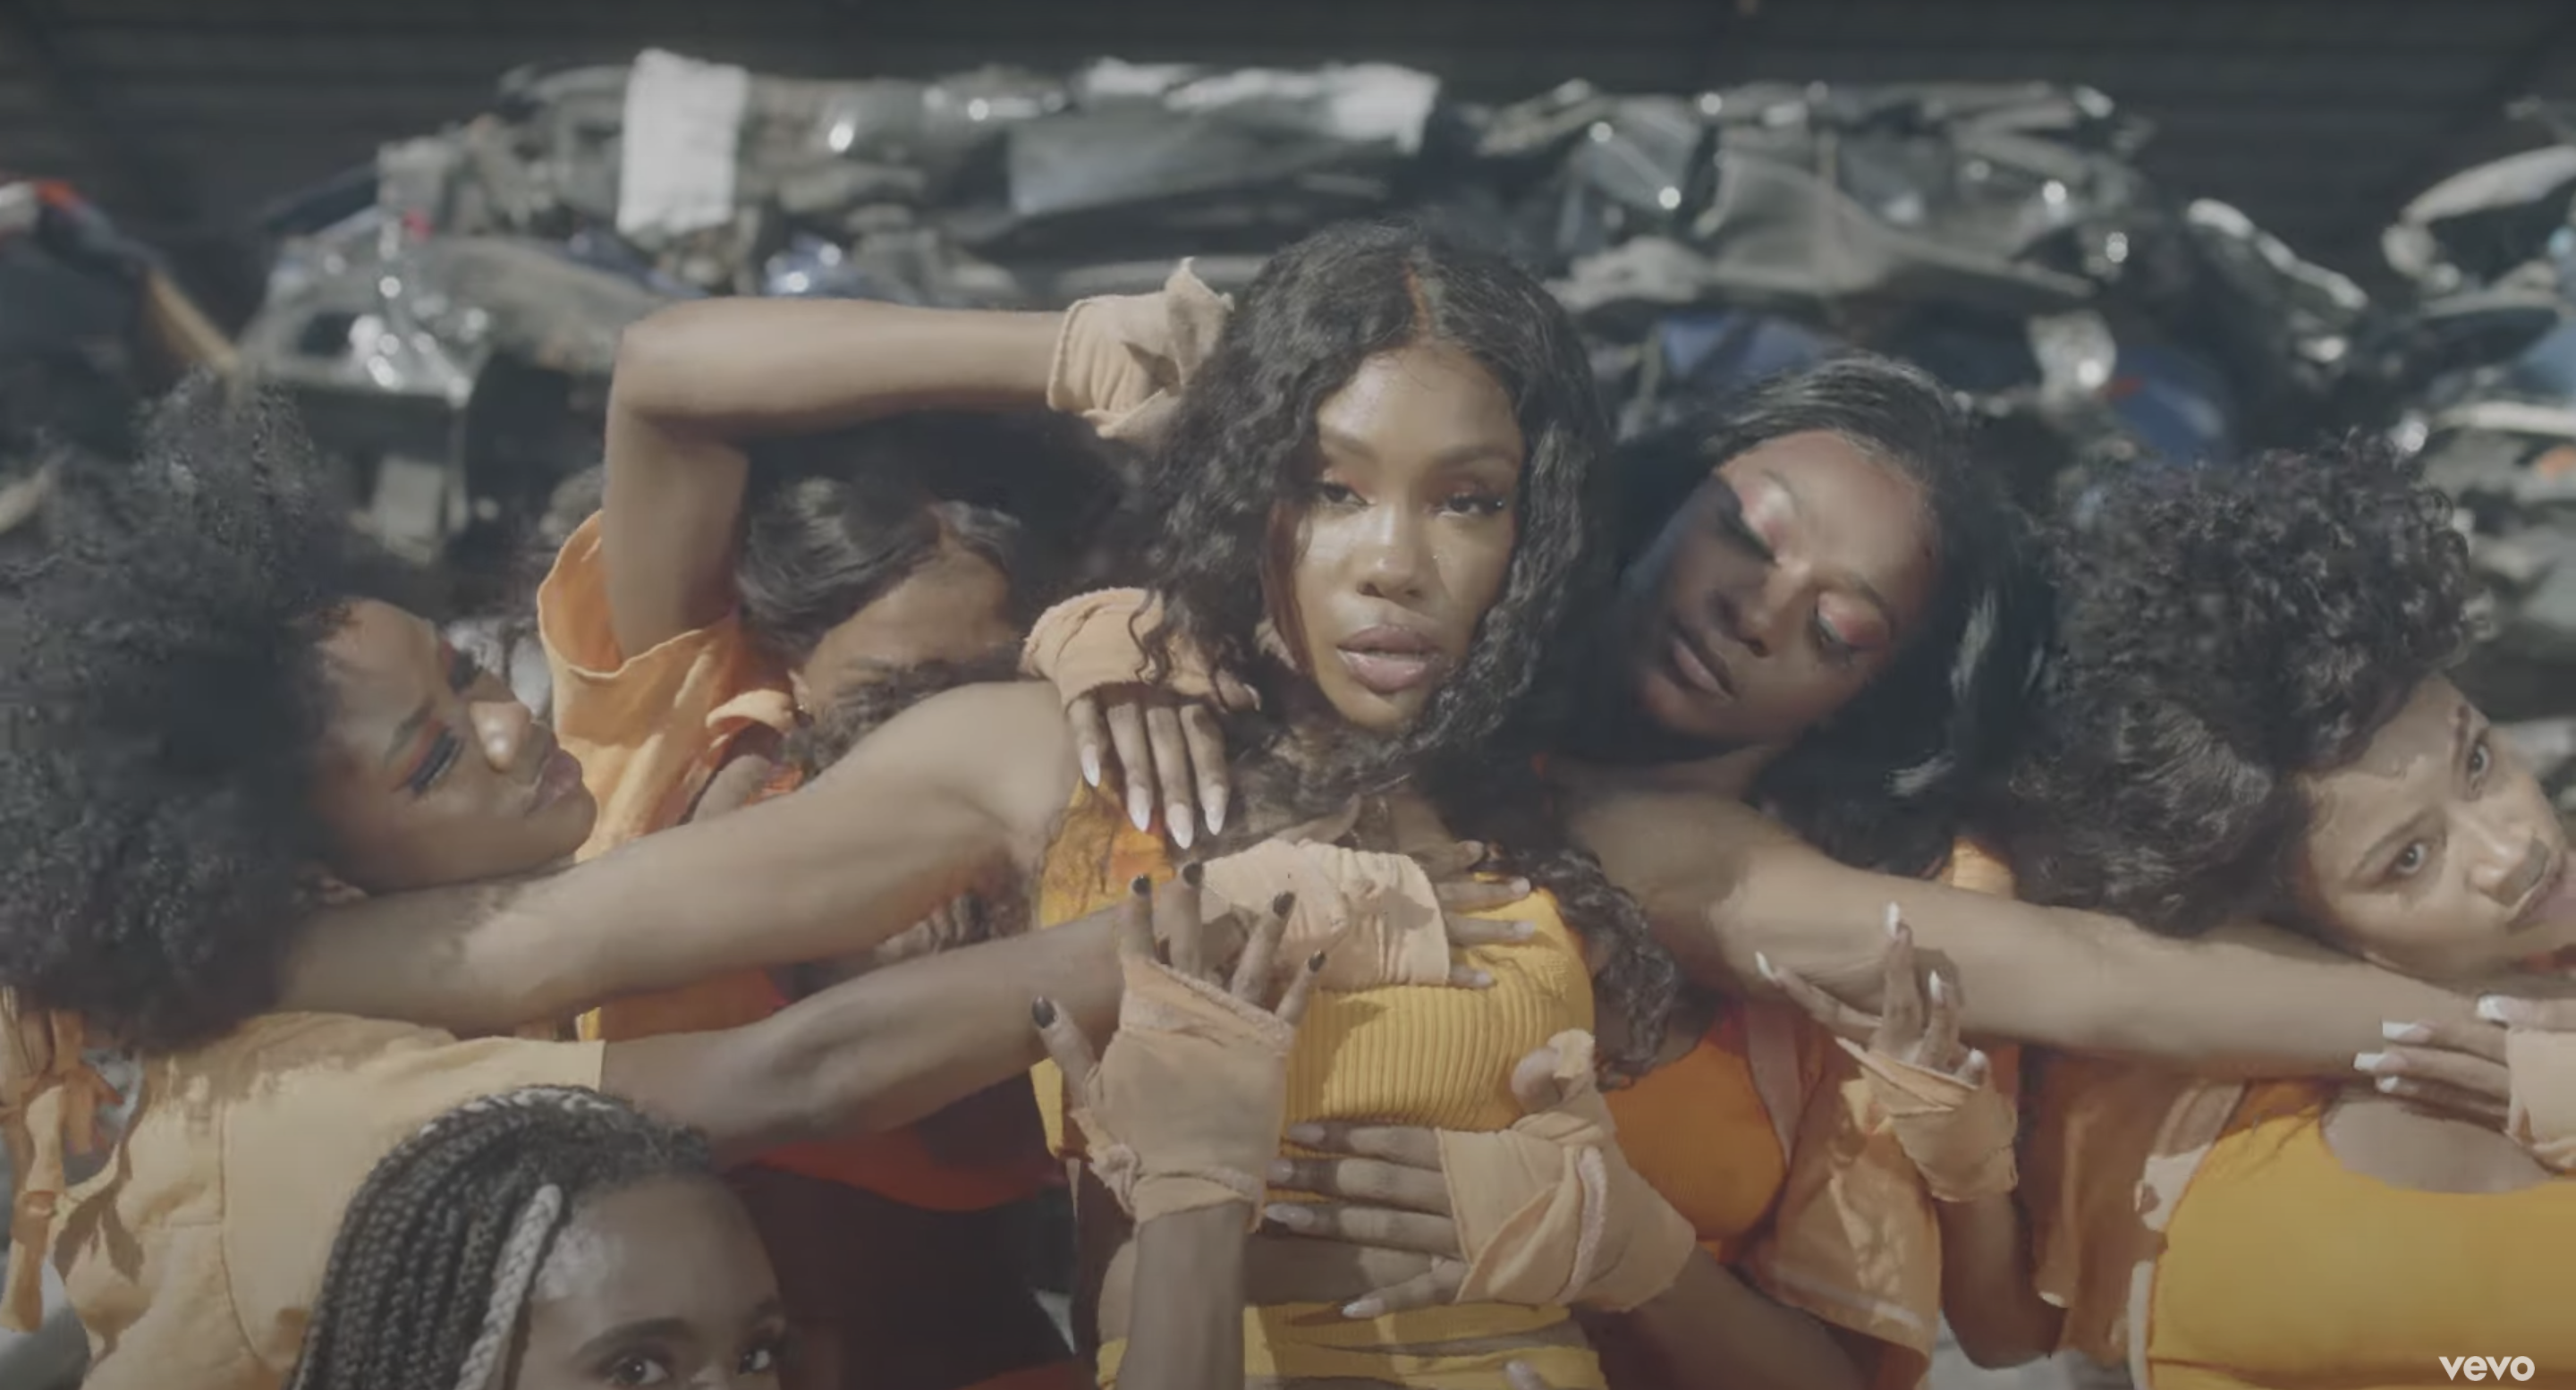 SZA Shines In Justin Timberlake's 'The Other Side' Visual